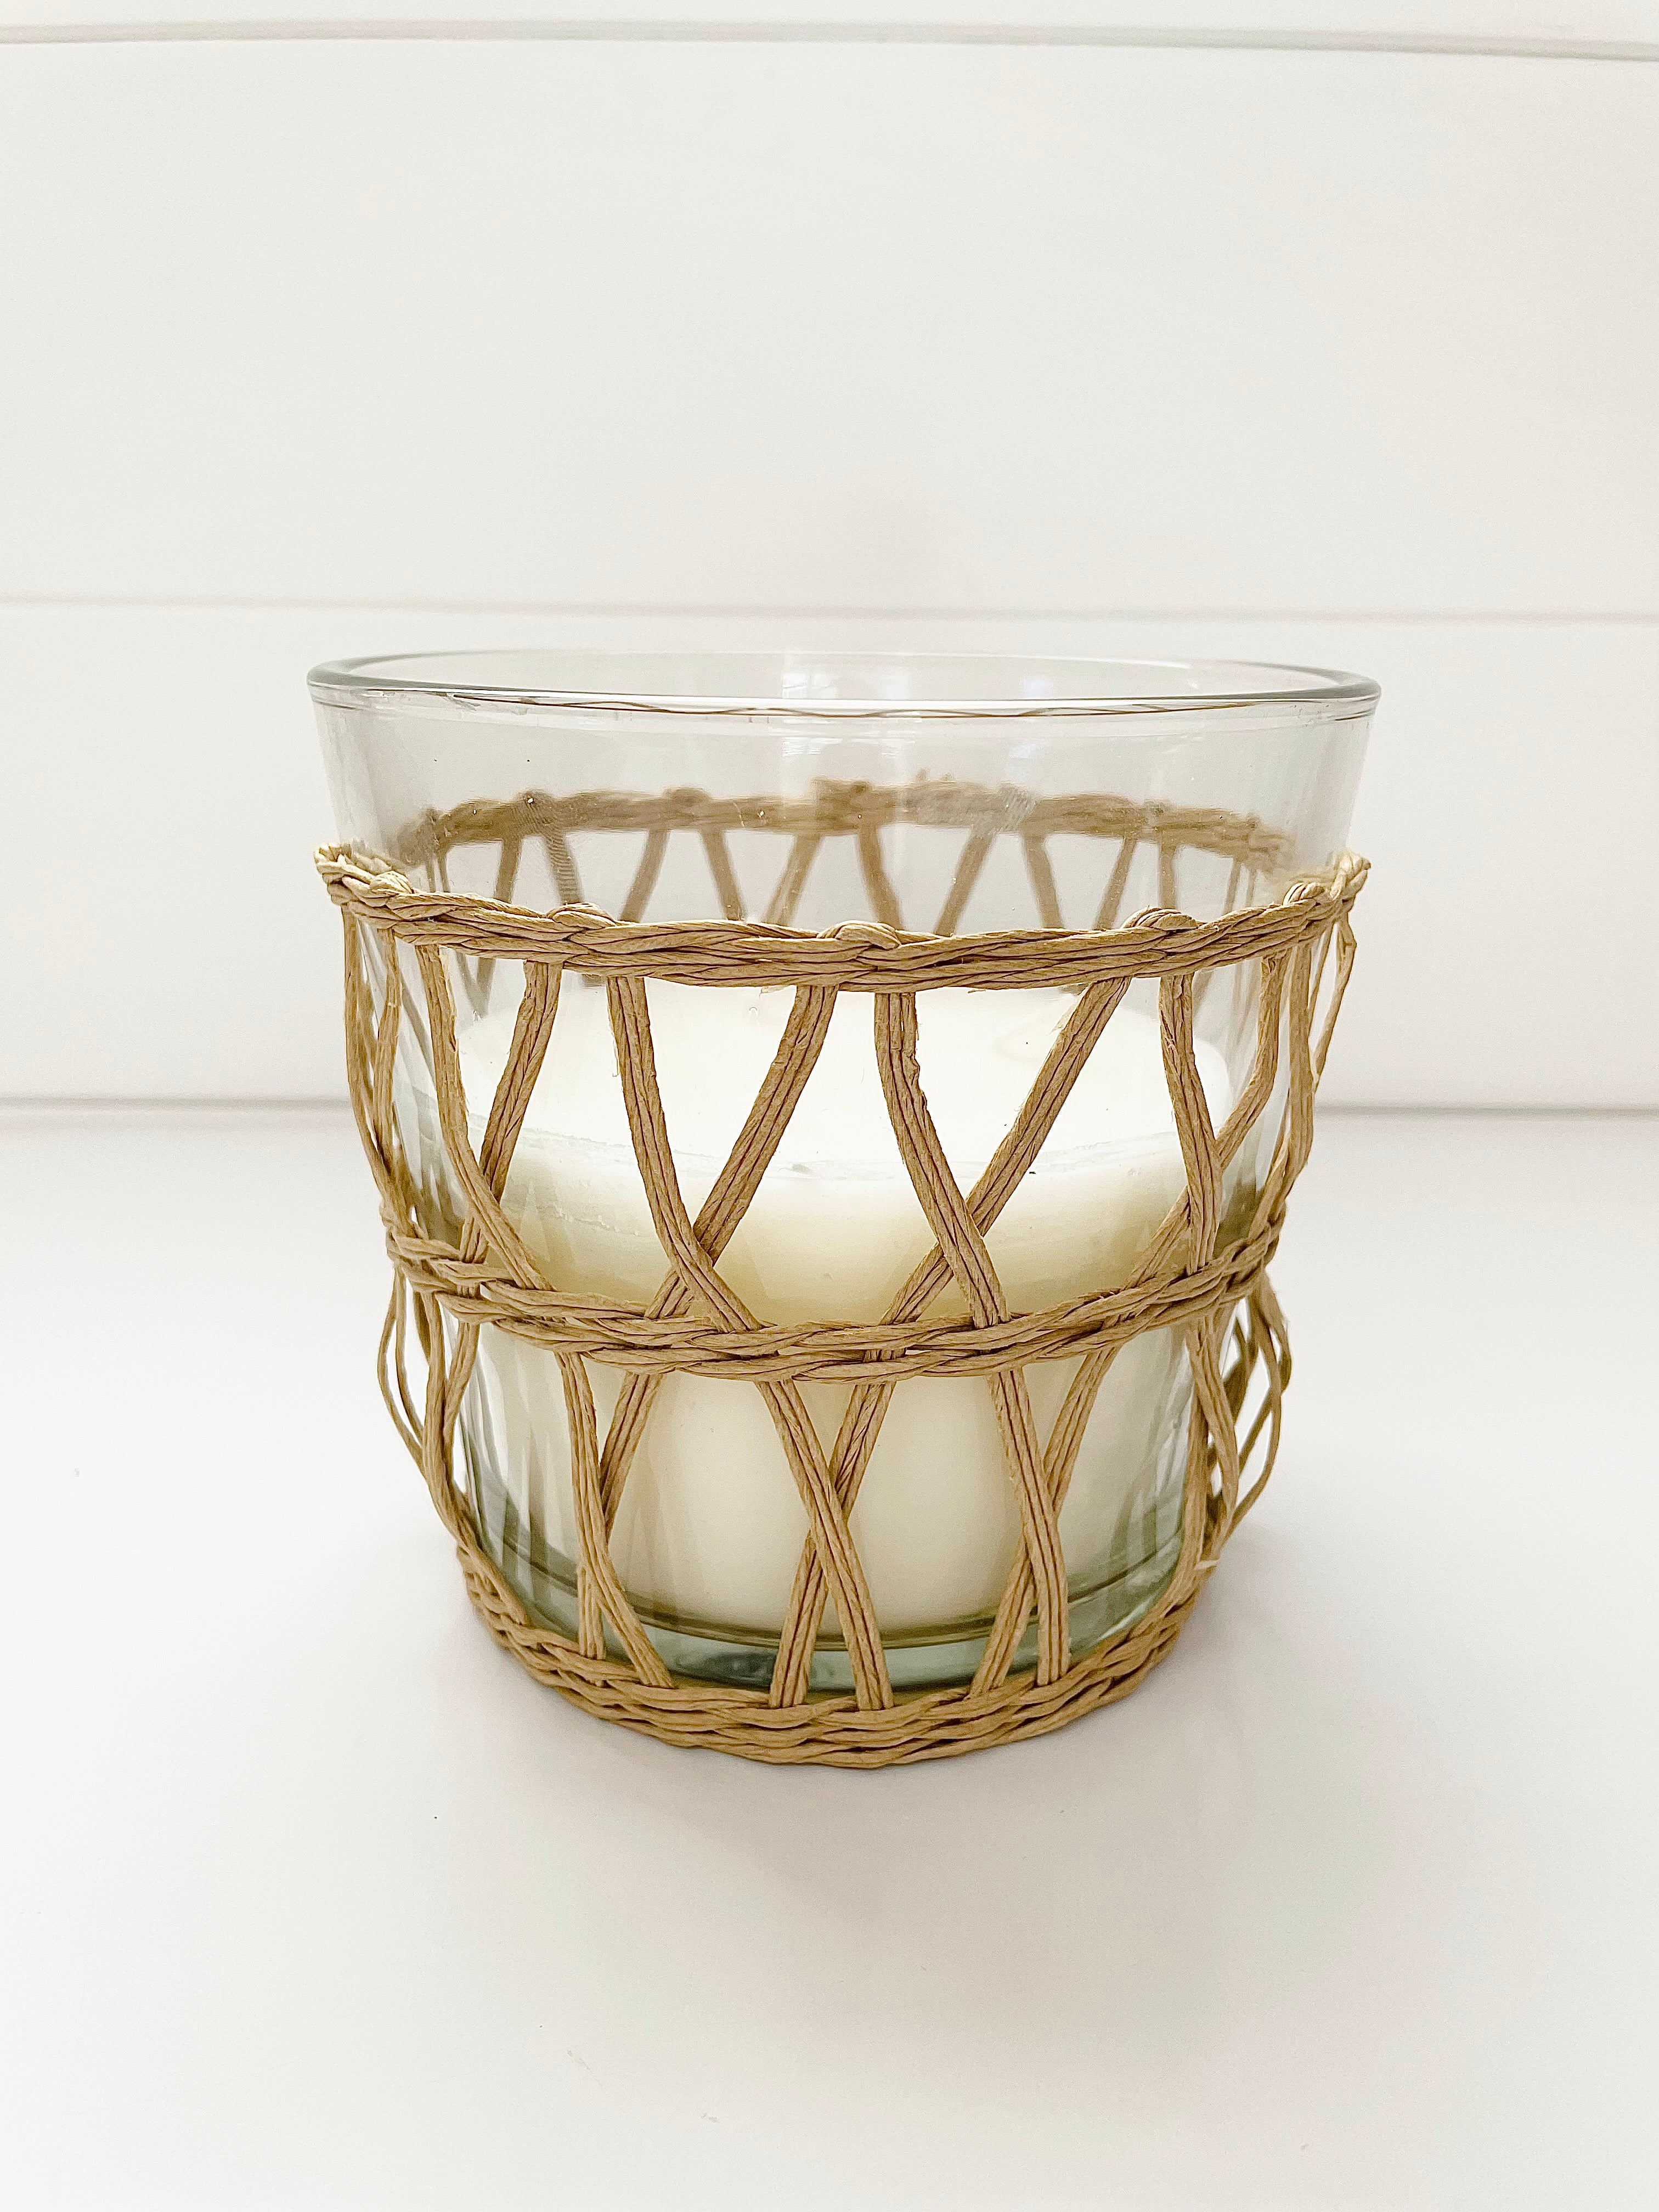 The Rattan candle